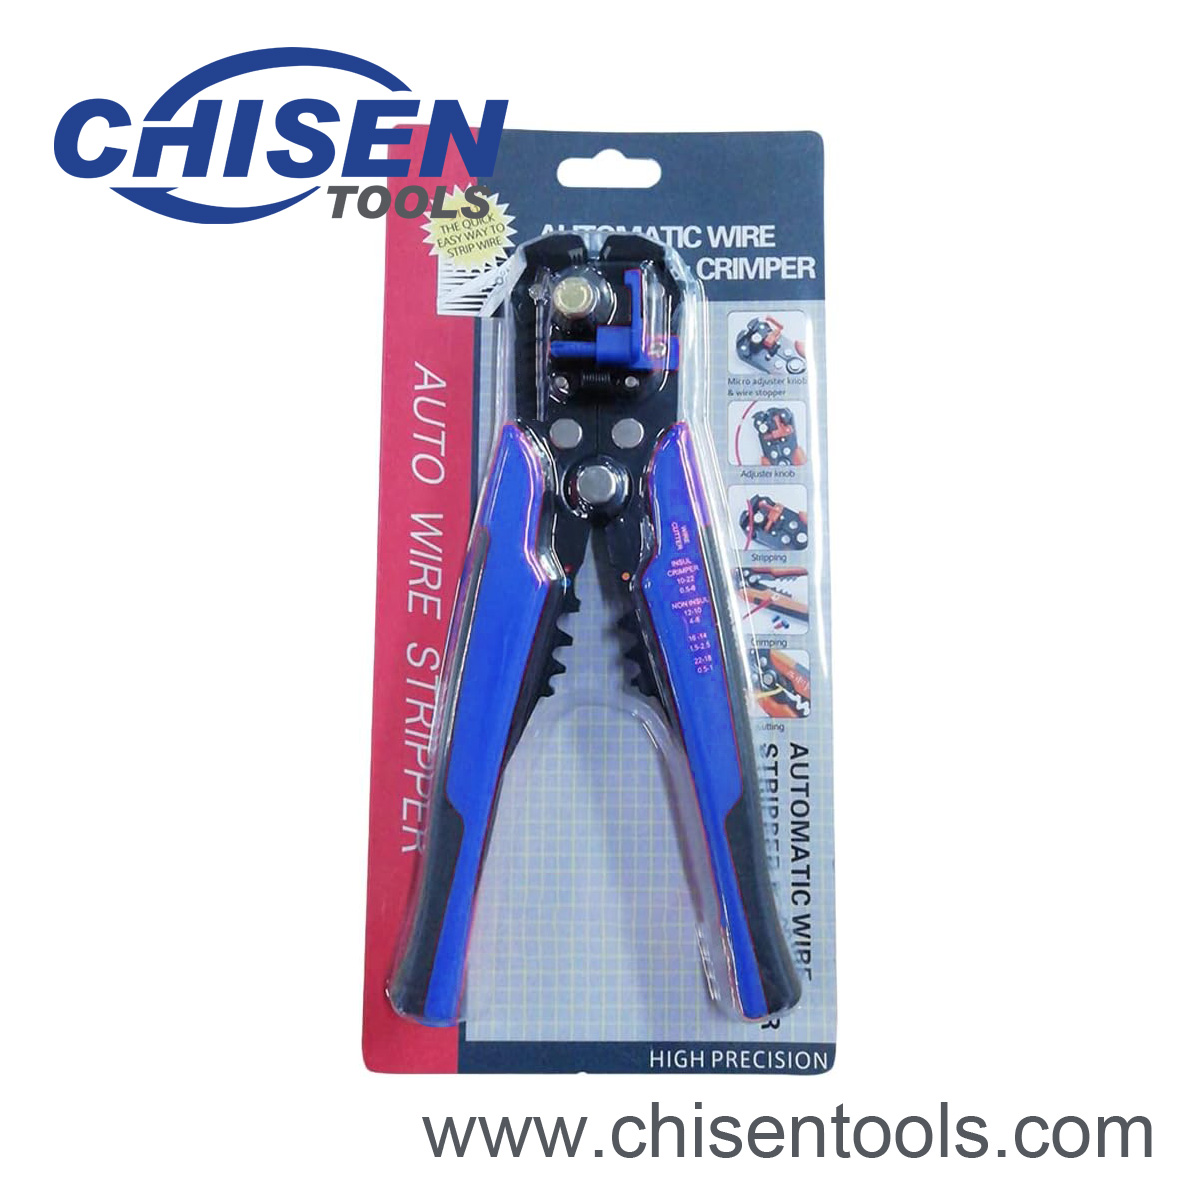 Ajustable Automatic Wire Stripper packed in Blister Card Packaging